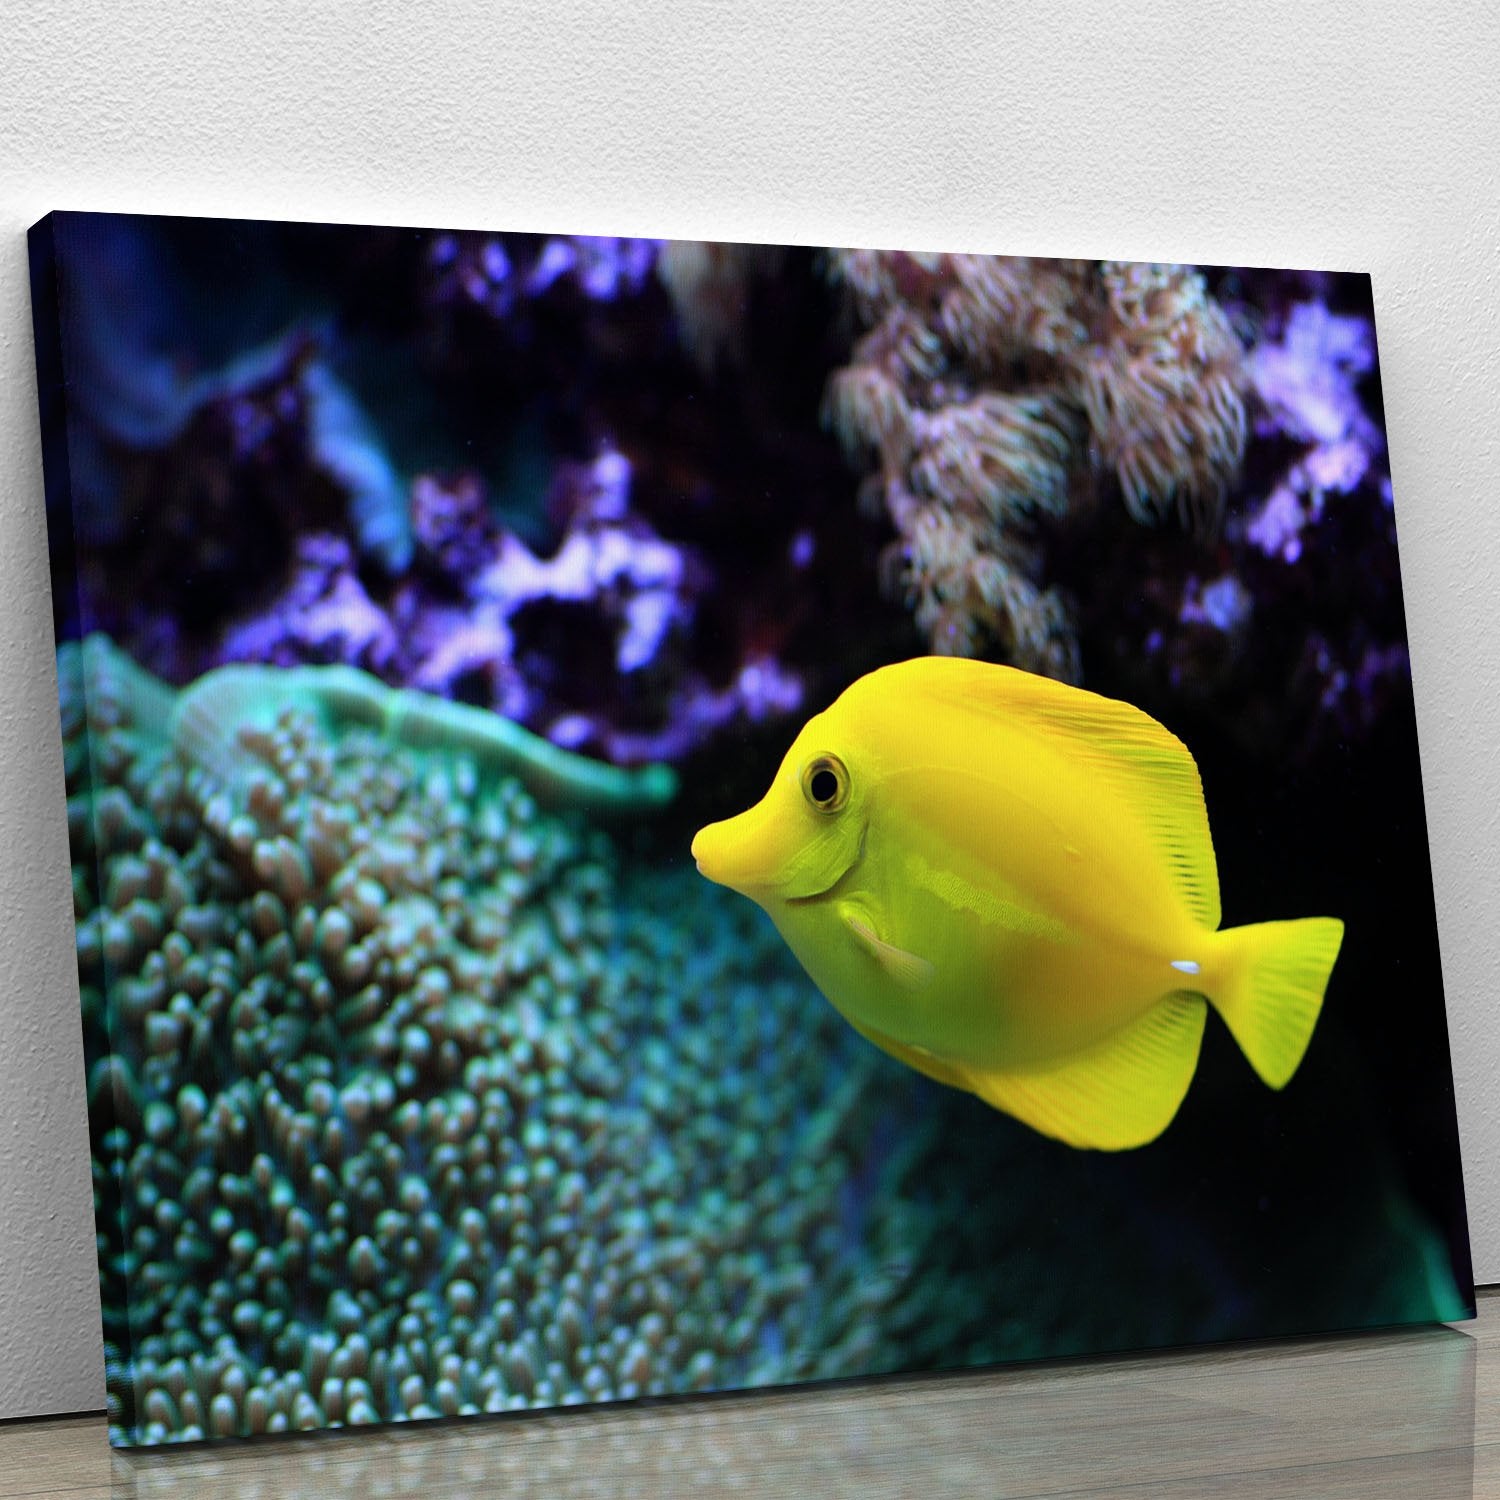 The yellow fish Canvas Print or Poster